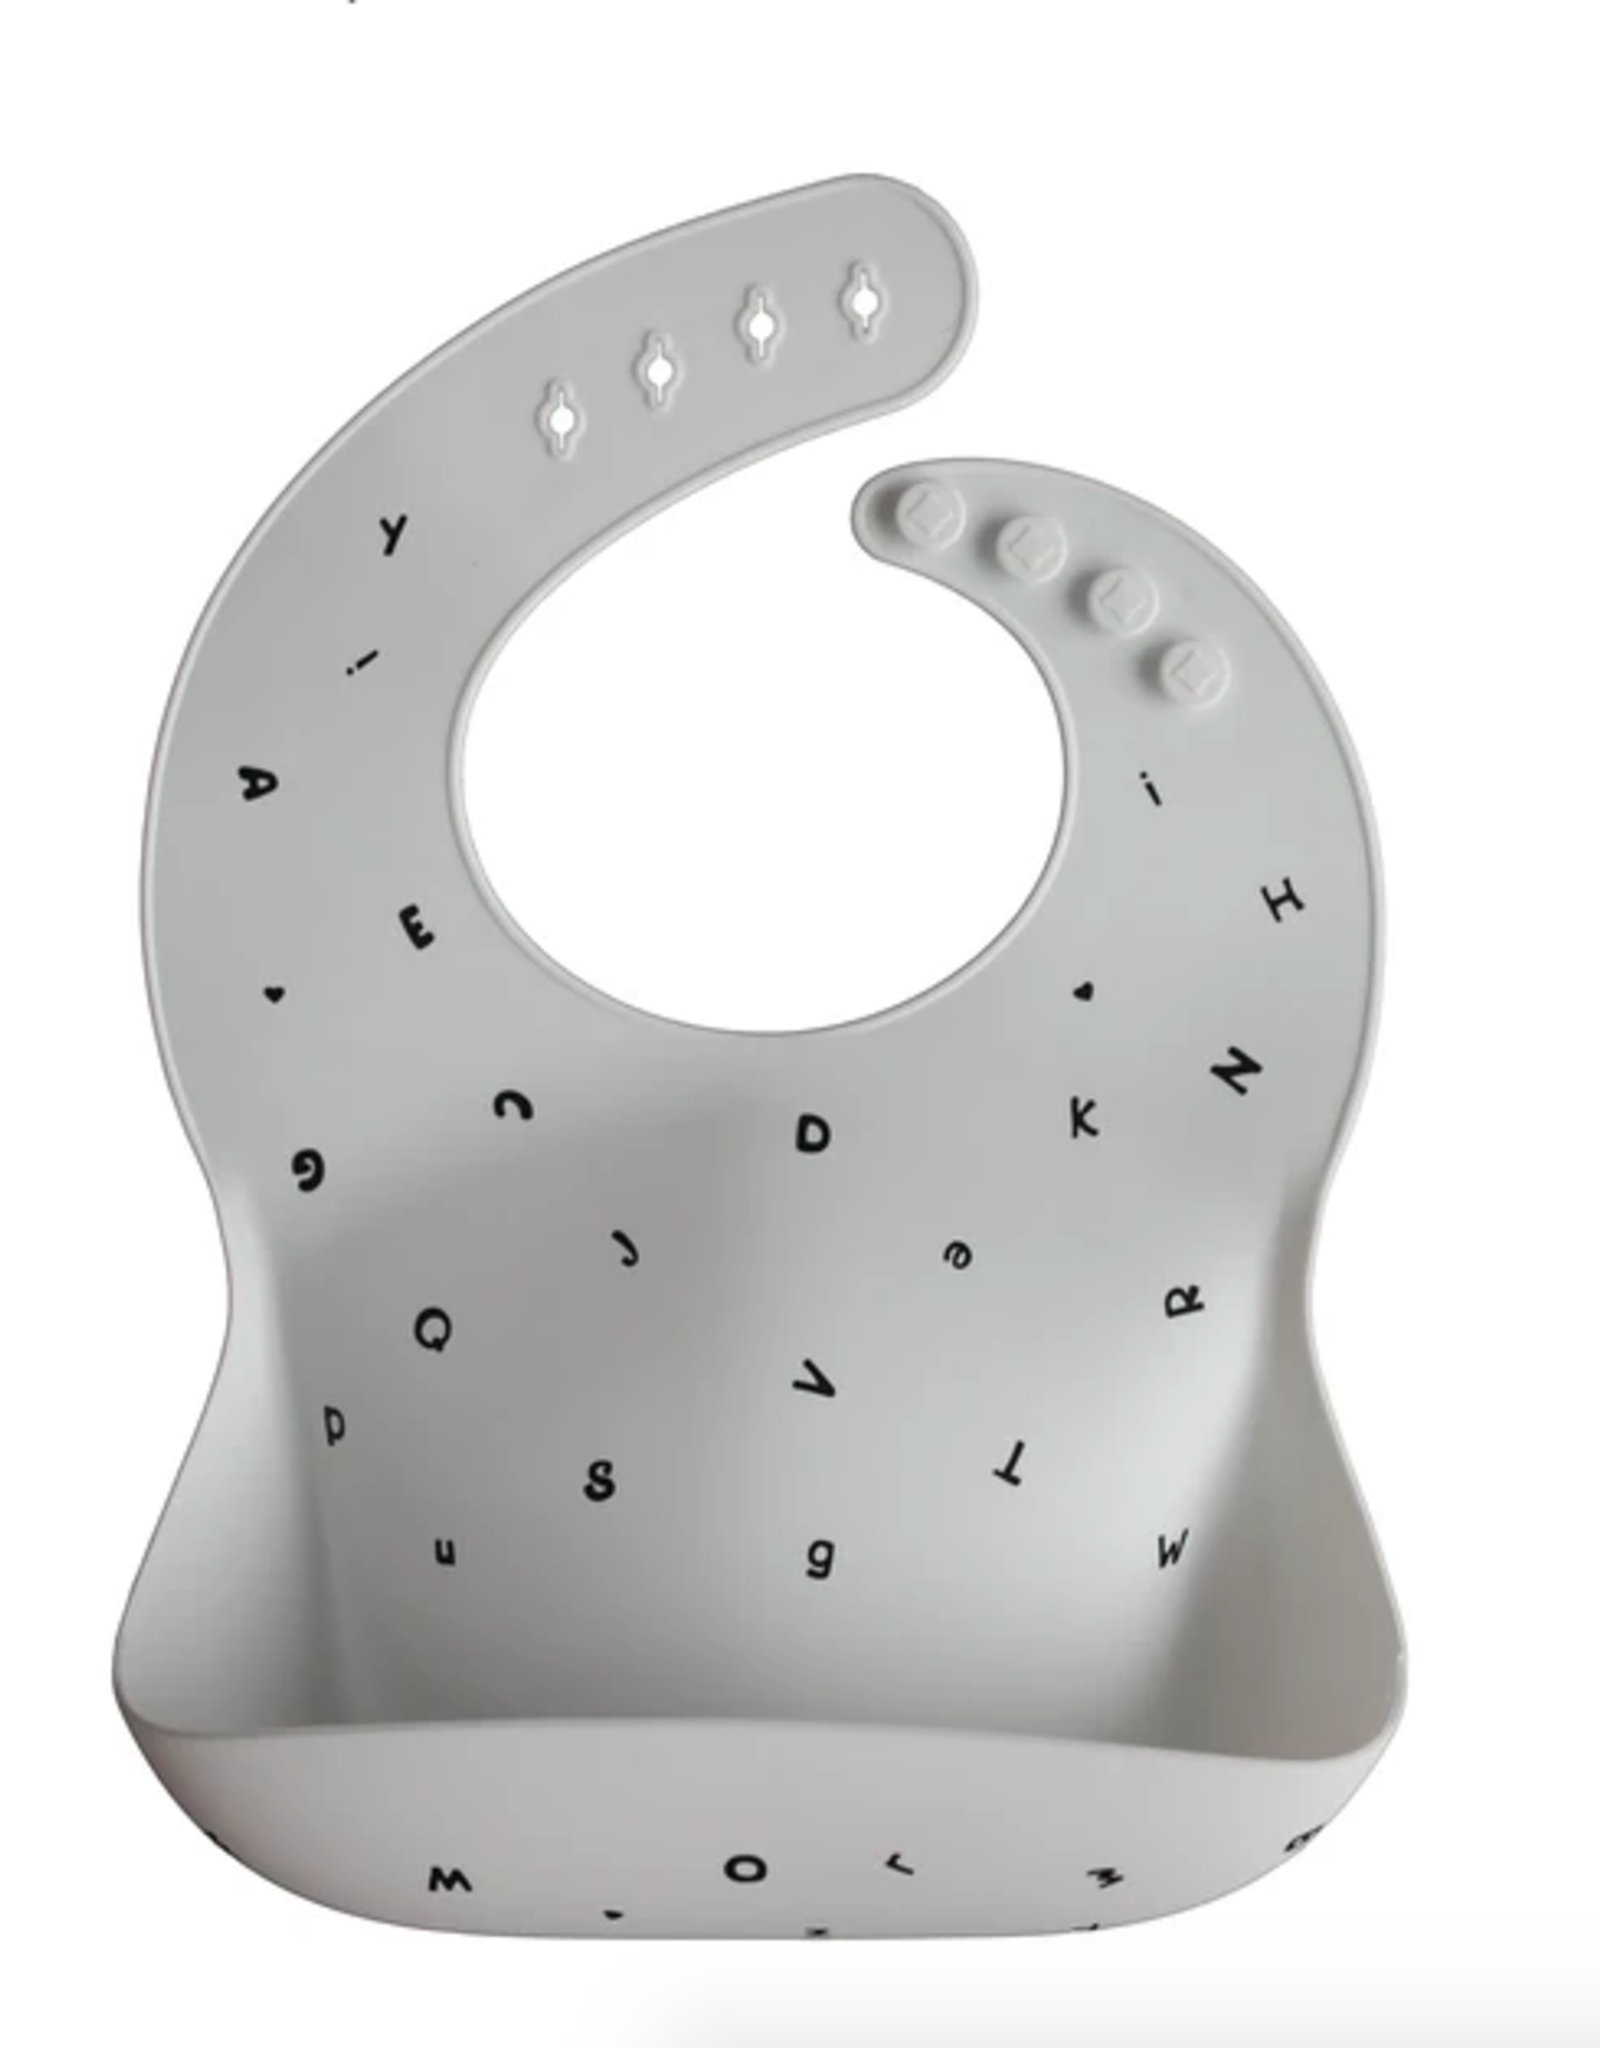 Silicone Baby Bib - Letters White